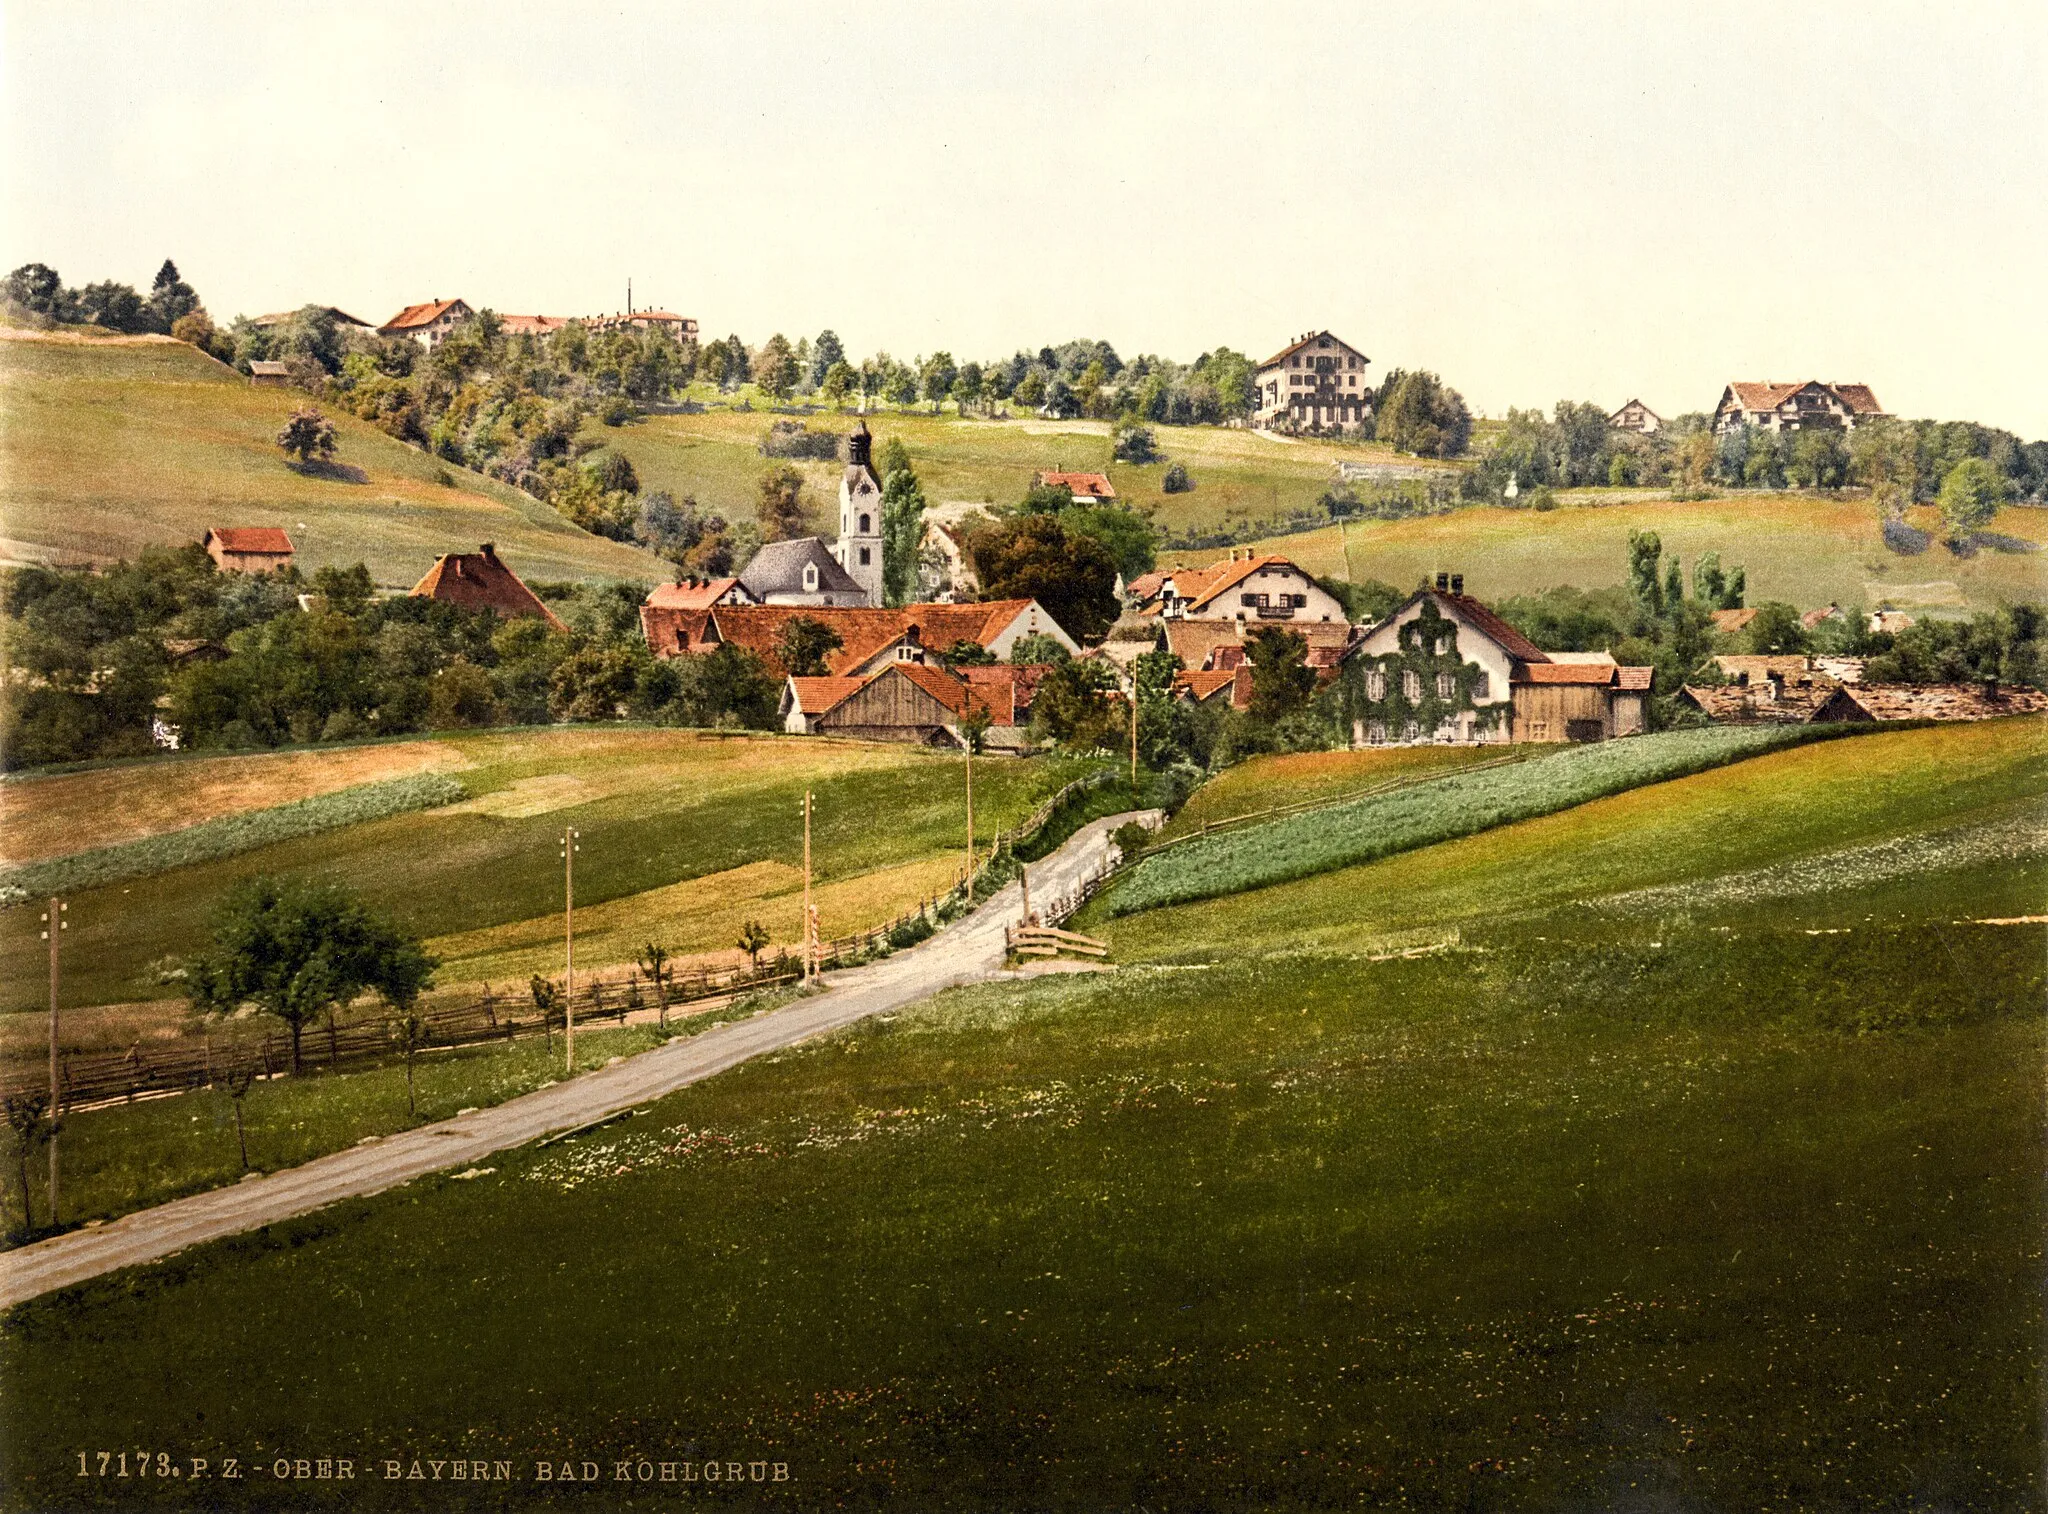 Photo showing: Photochrom print by Photoglob Zürich, between 1890 and 1900.
From the Photochrom Prints Collection at the Library of Congress

More photochroms from Germany